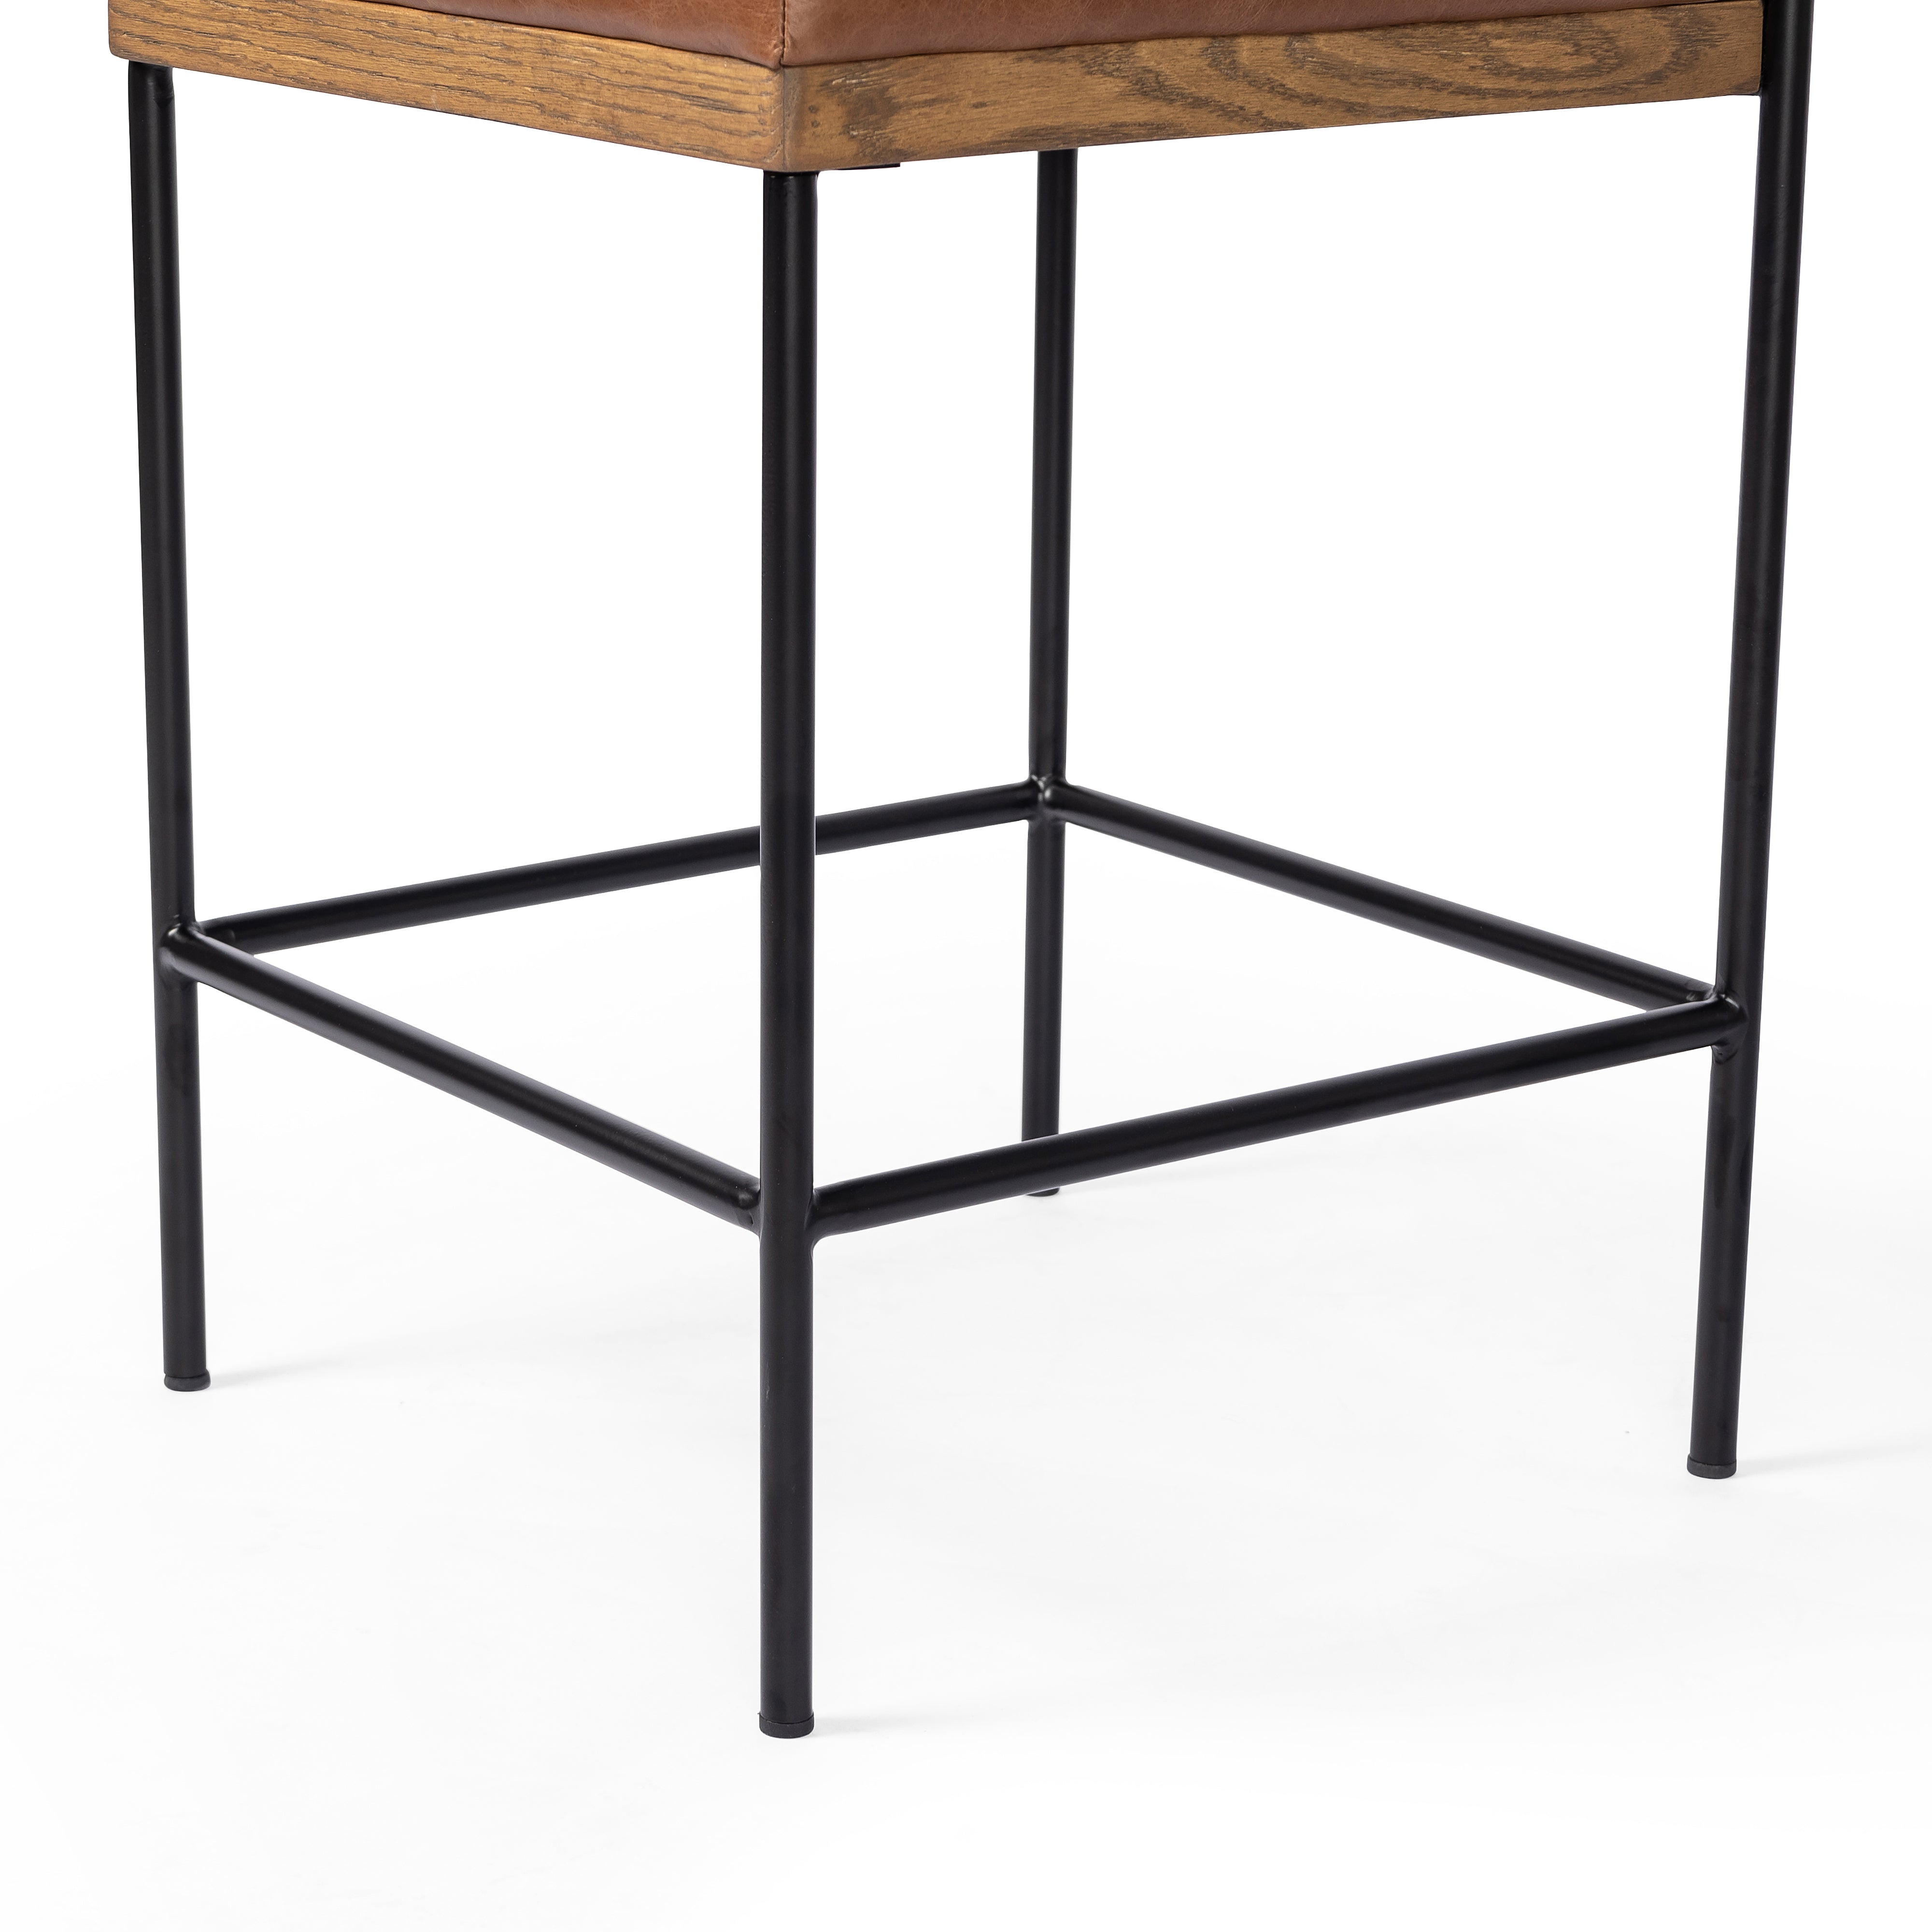 Sonoma Chestnut Leather and Drifted Oak with Midnight Iron (Counter Height) | Benton Bar/Counter Stool | Valley Ridge Furniture